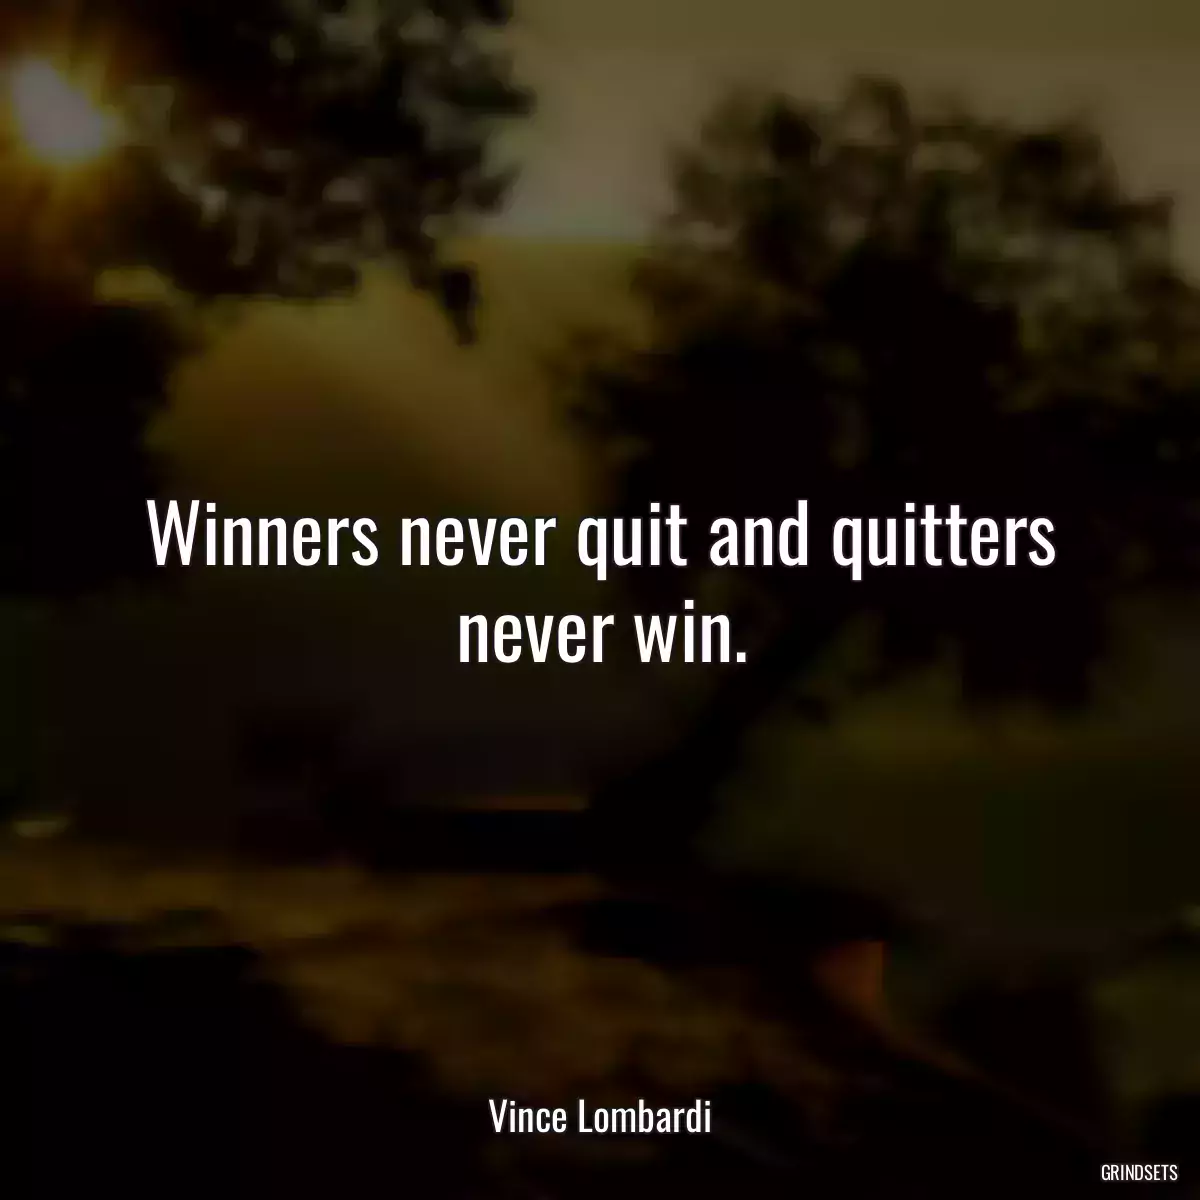 Winners never quit and quitters never win.